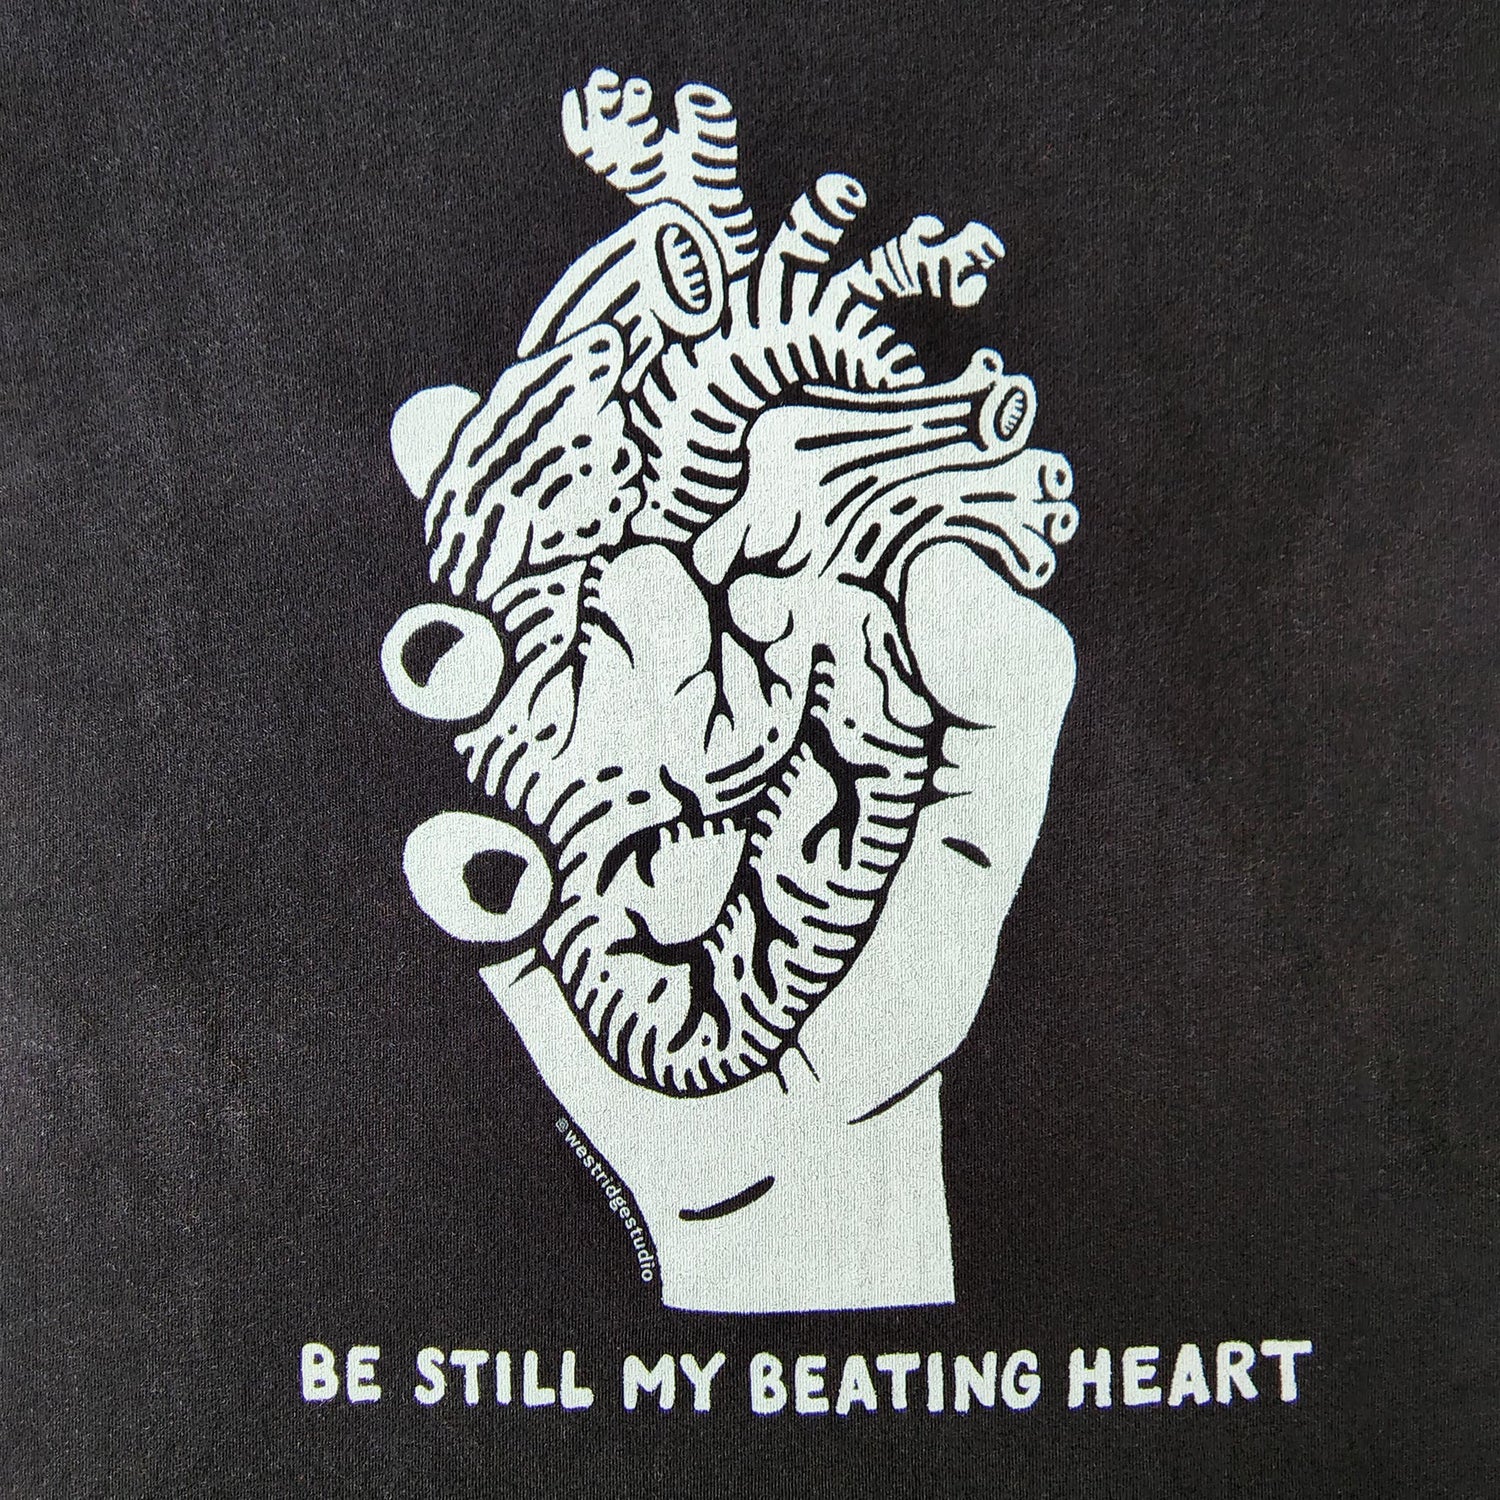 Be Still My Beating Heart graphic black t-shirt for women - detail of heart graphic